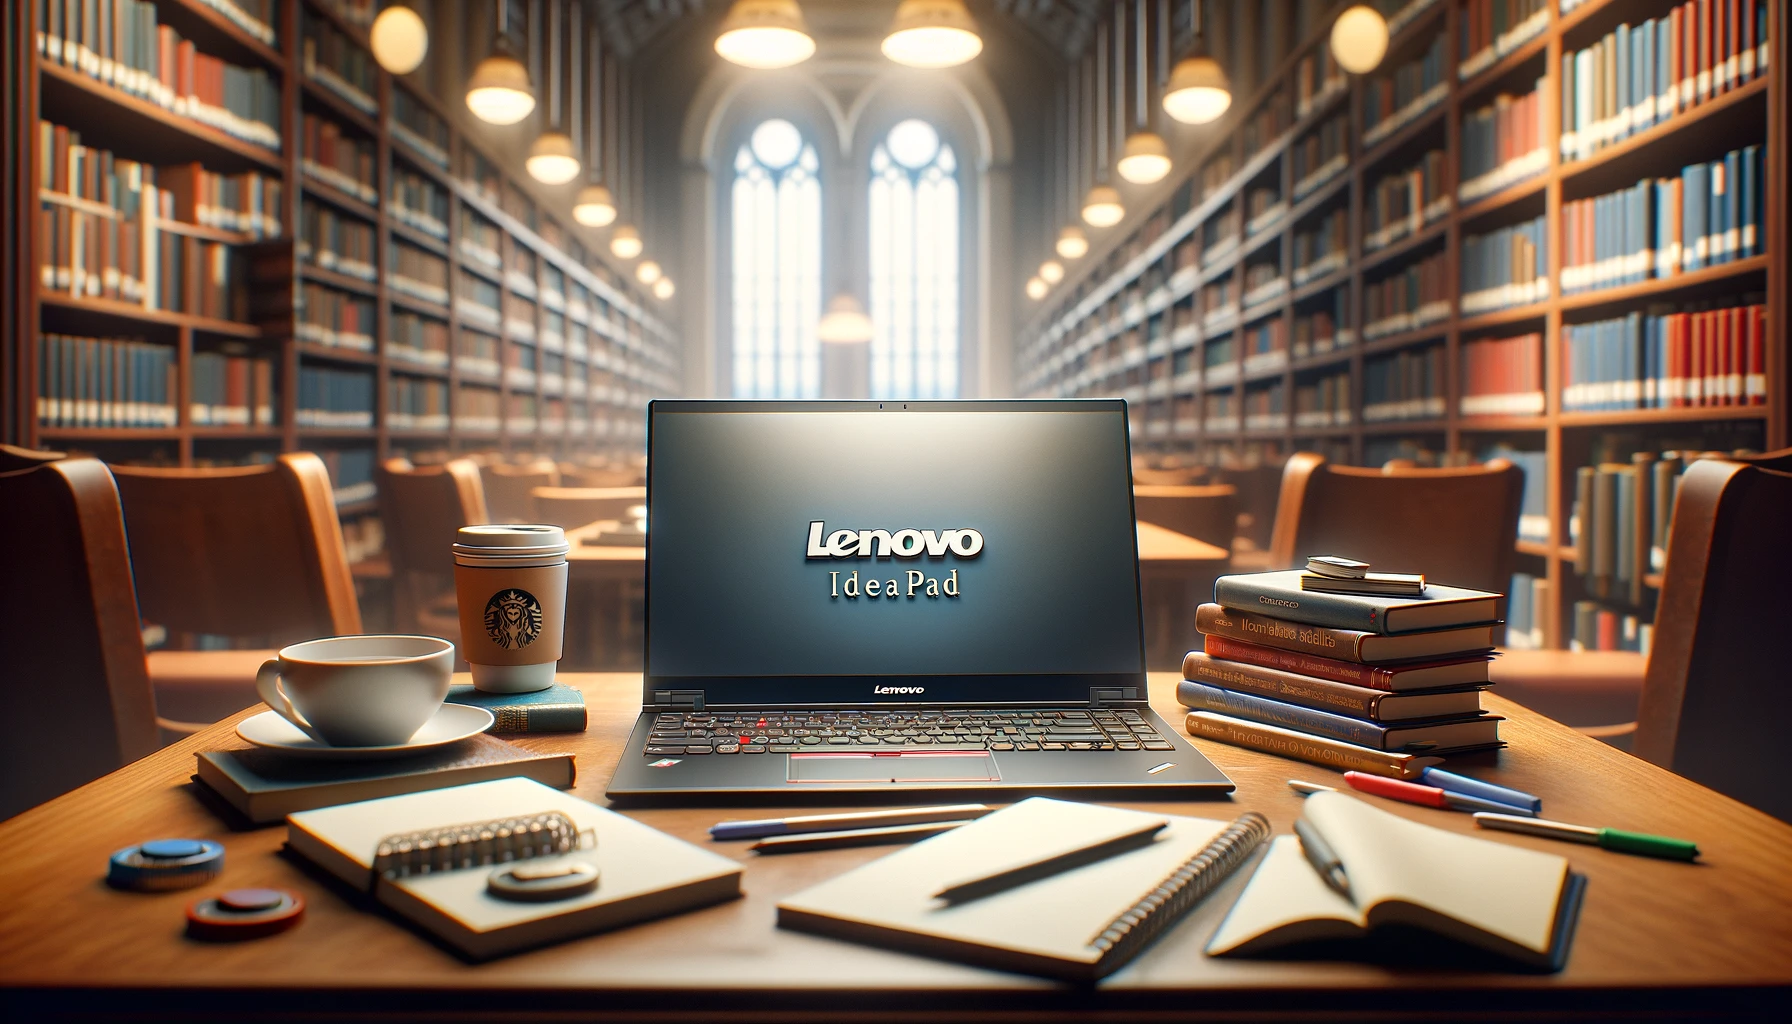 The image above features a 3D stock photo showcasing a Lenovo IdeaPad laptop in a university library setting, surrounded by study materials, highlighting the integration of technology with traditional learning resources to support education and creativity.